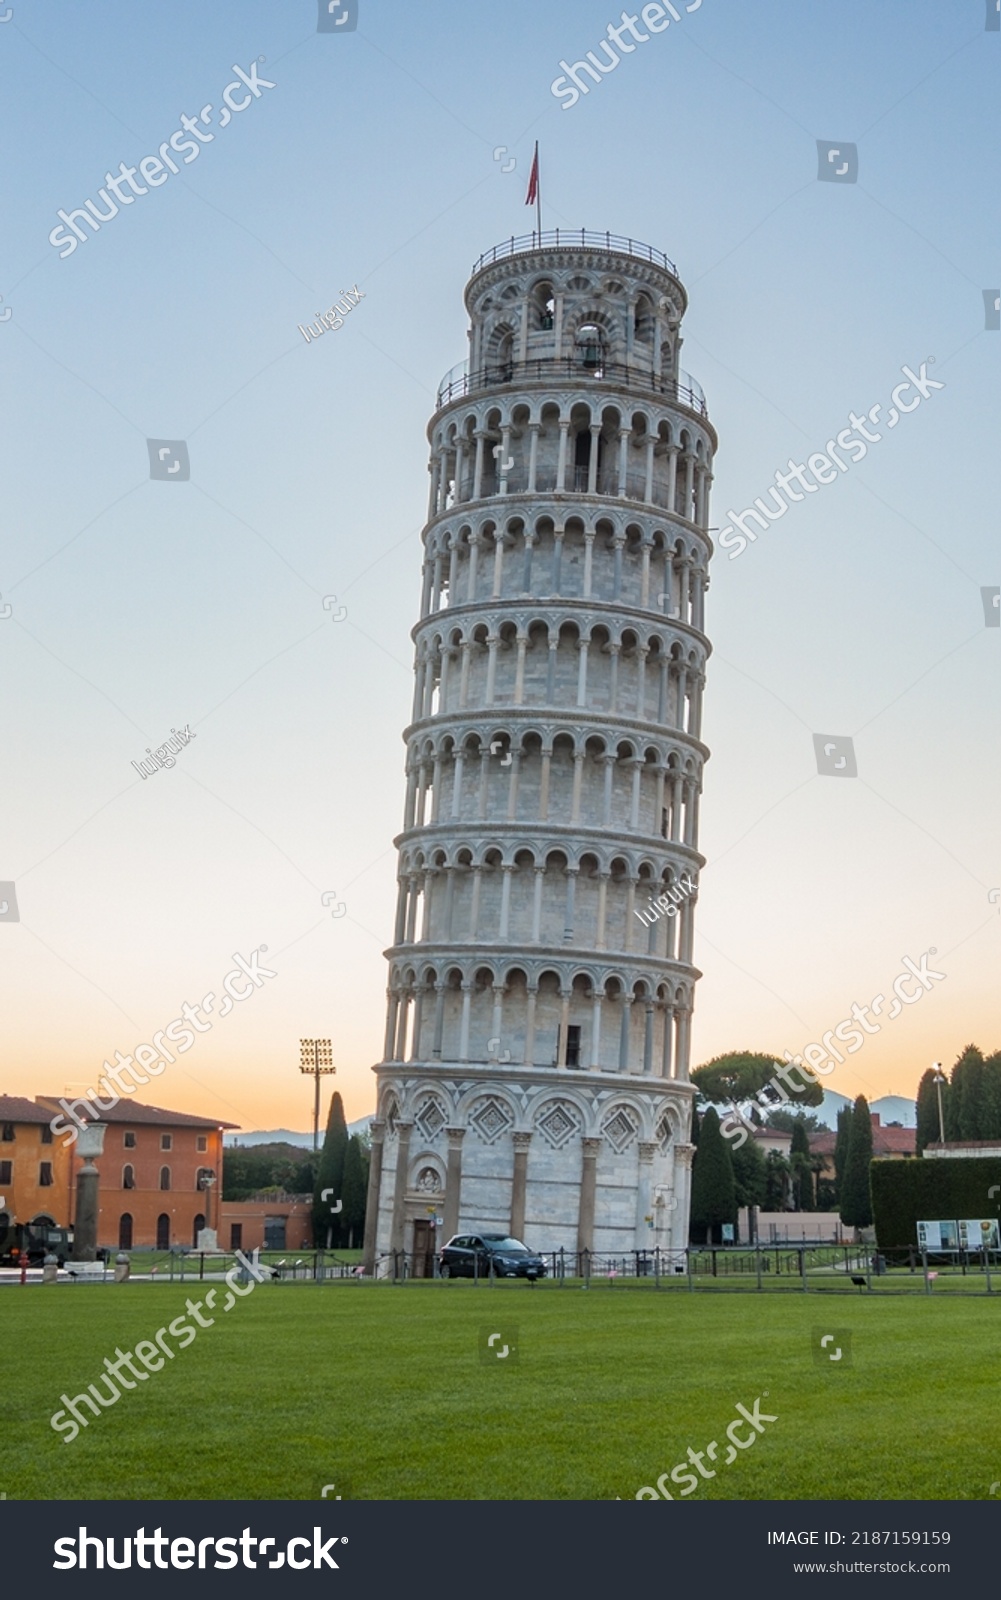 Pisa tower at sunrise without people #2187159159